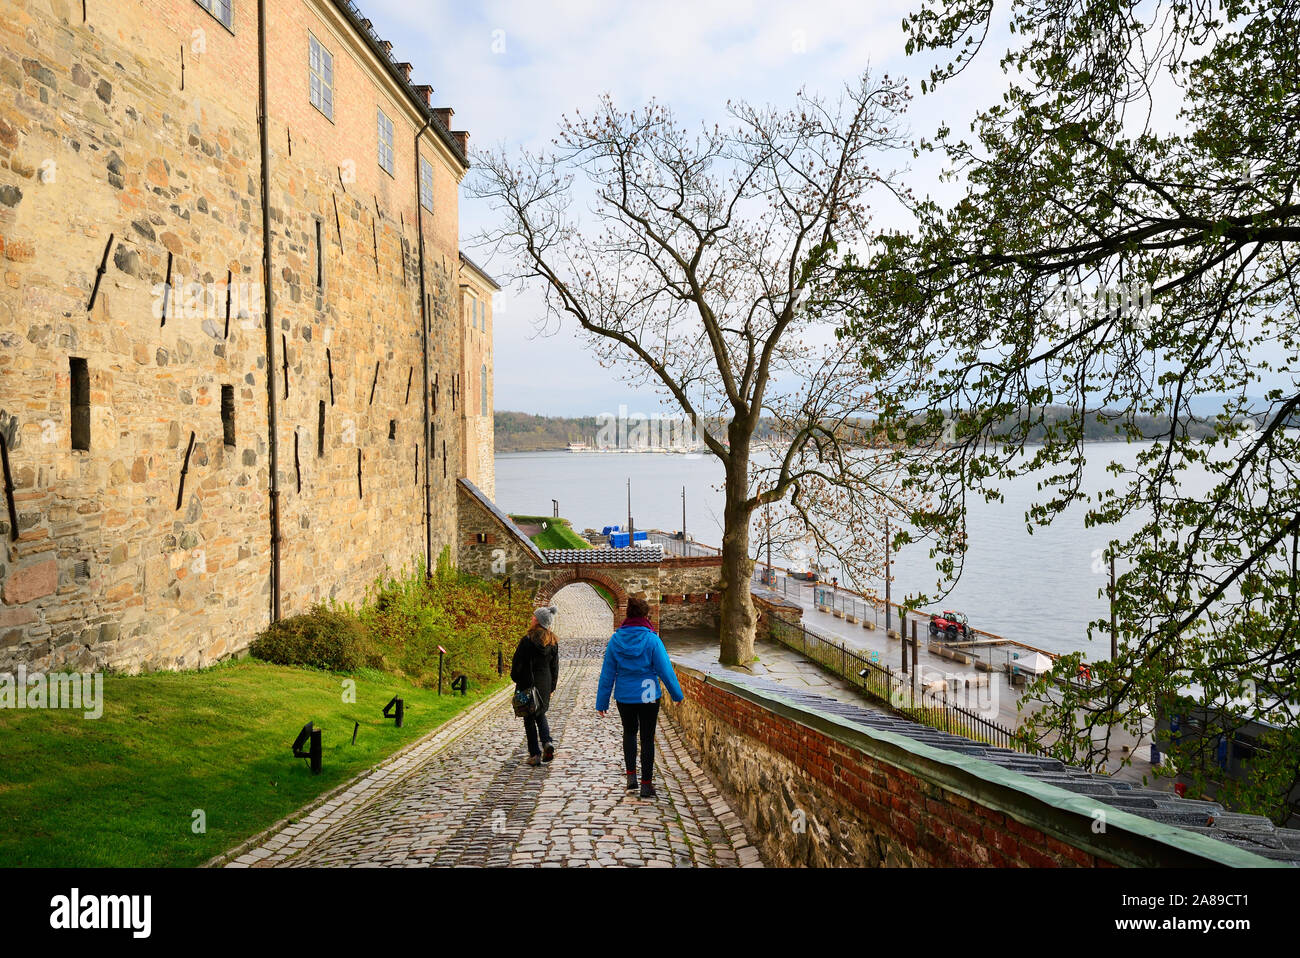 Akershus Fortress (Akershus Festning), an iconic guardian of Oslo. Norway Stock Photo